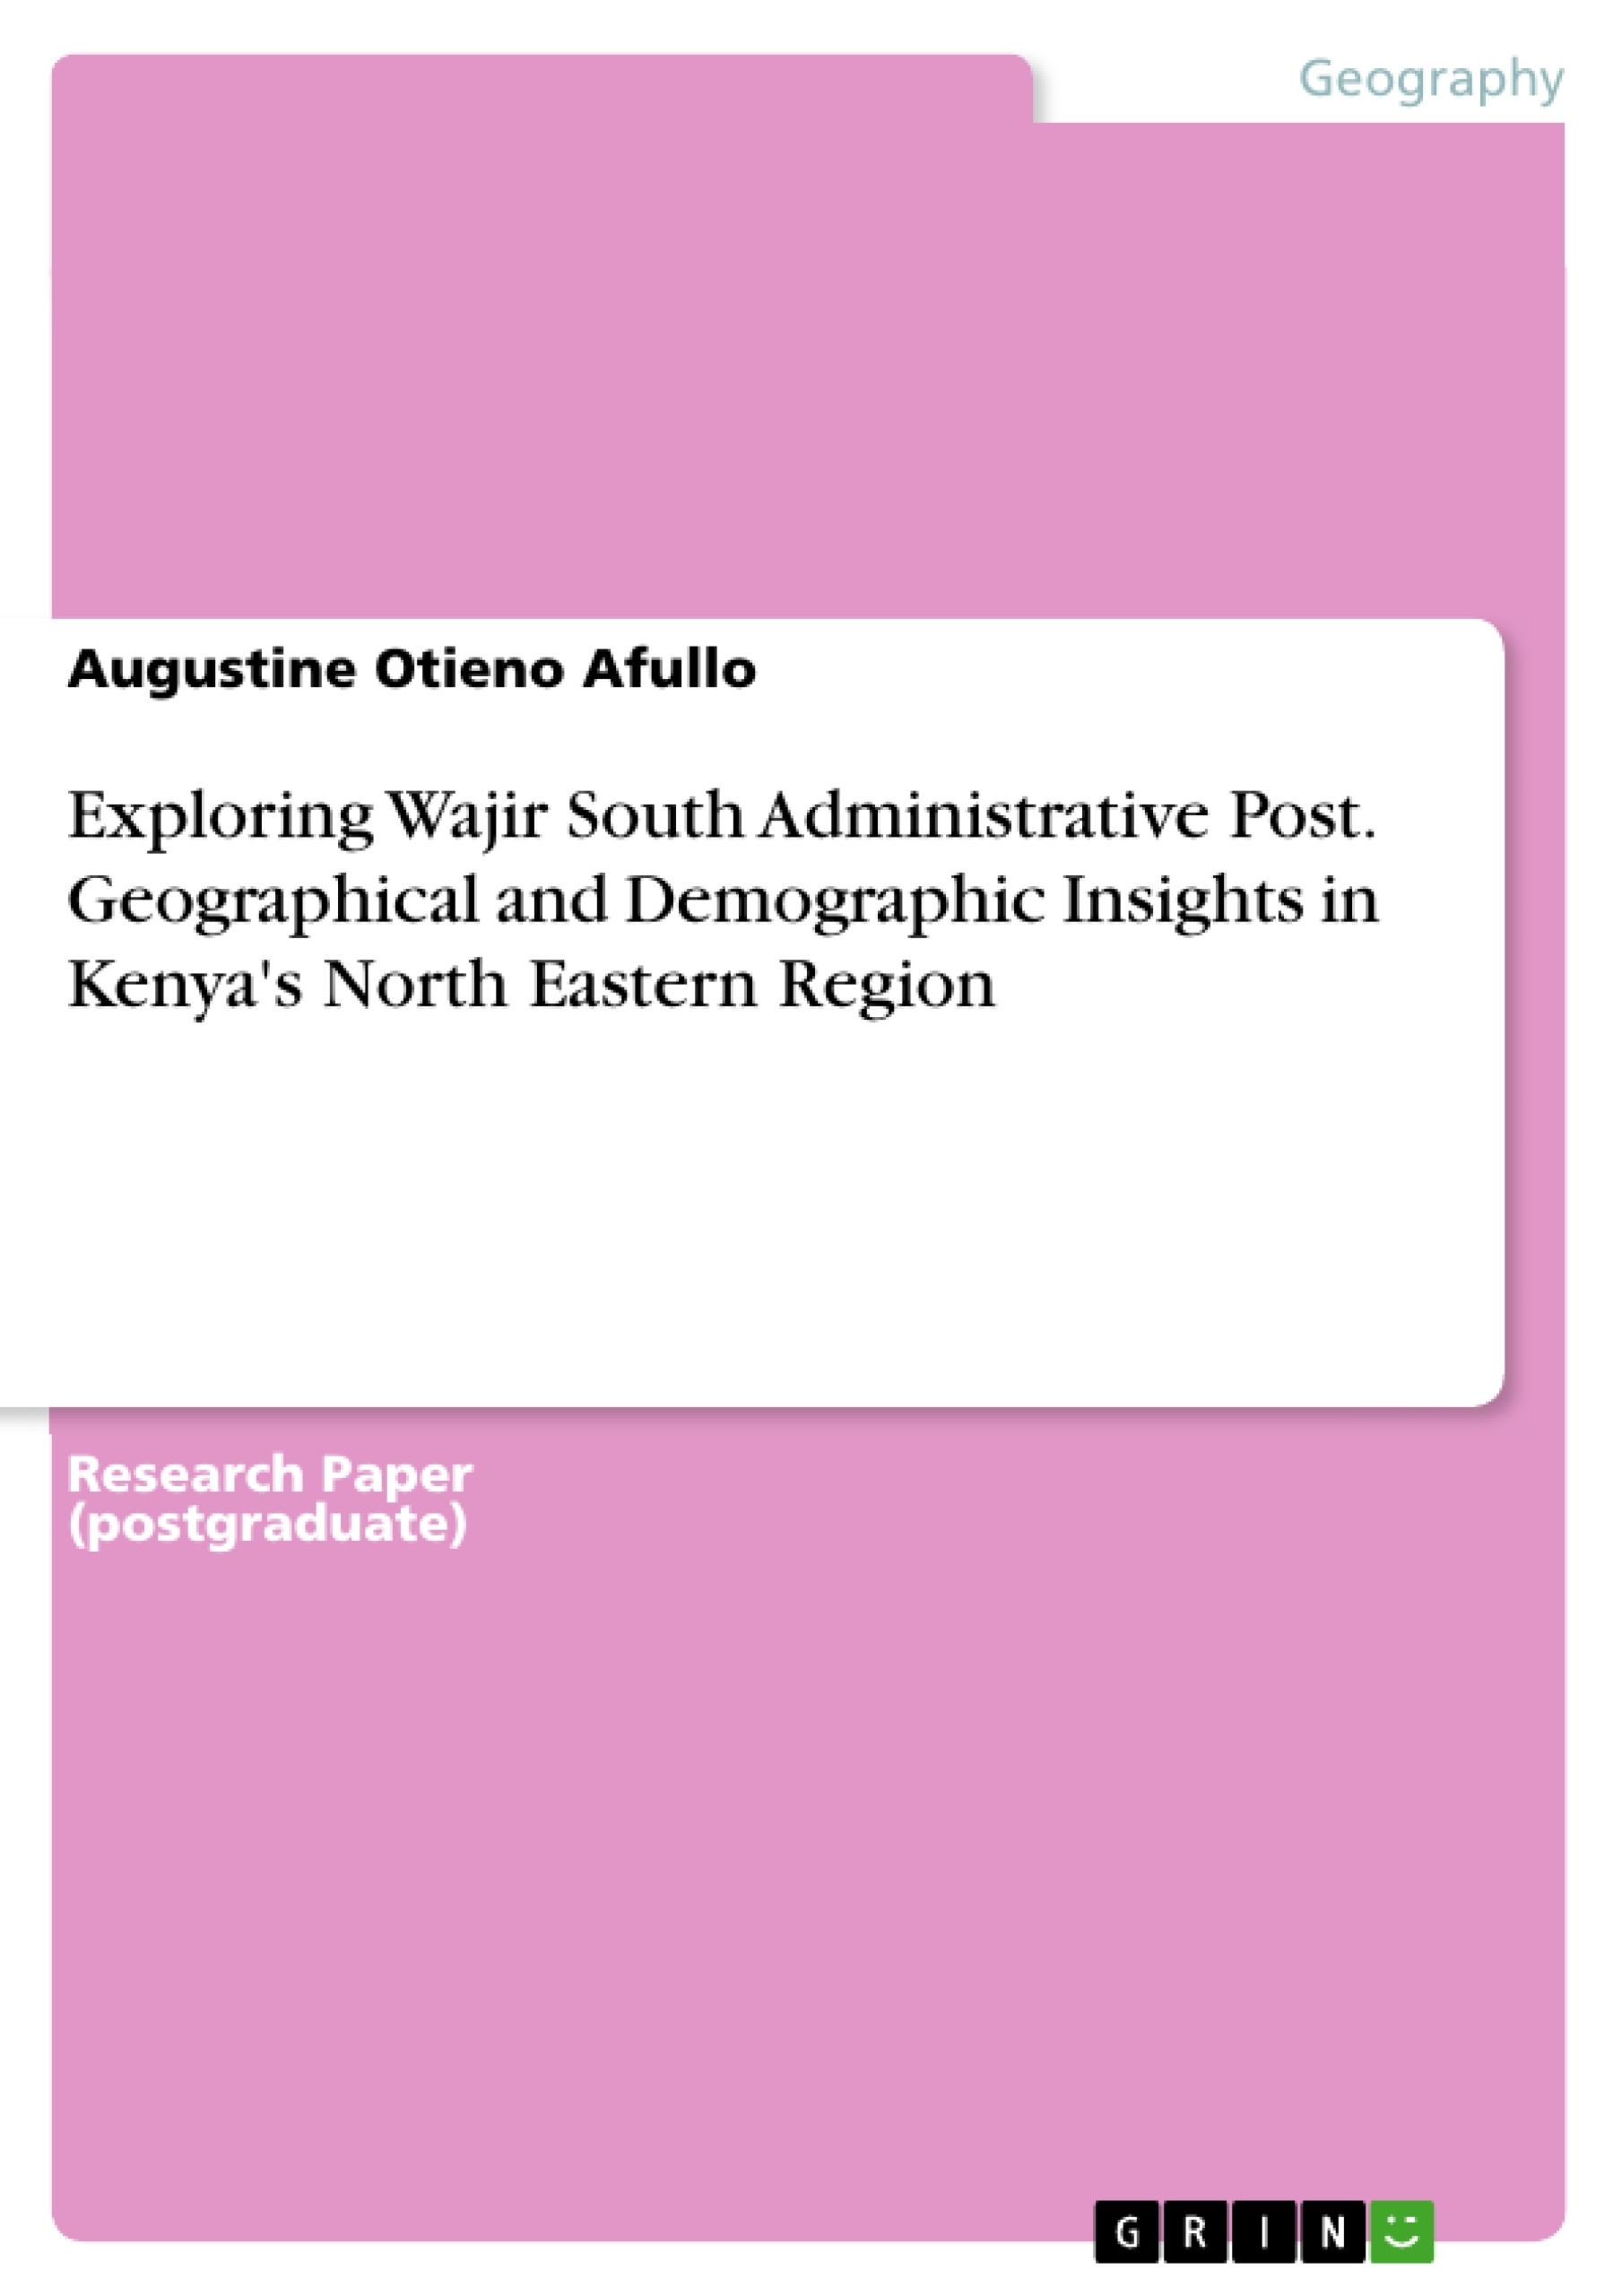 Title: Exploring Wajir South Administrative Post. Geographical and Demographic Insights in Kenya's North Eastern Region